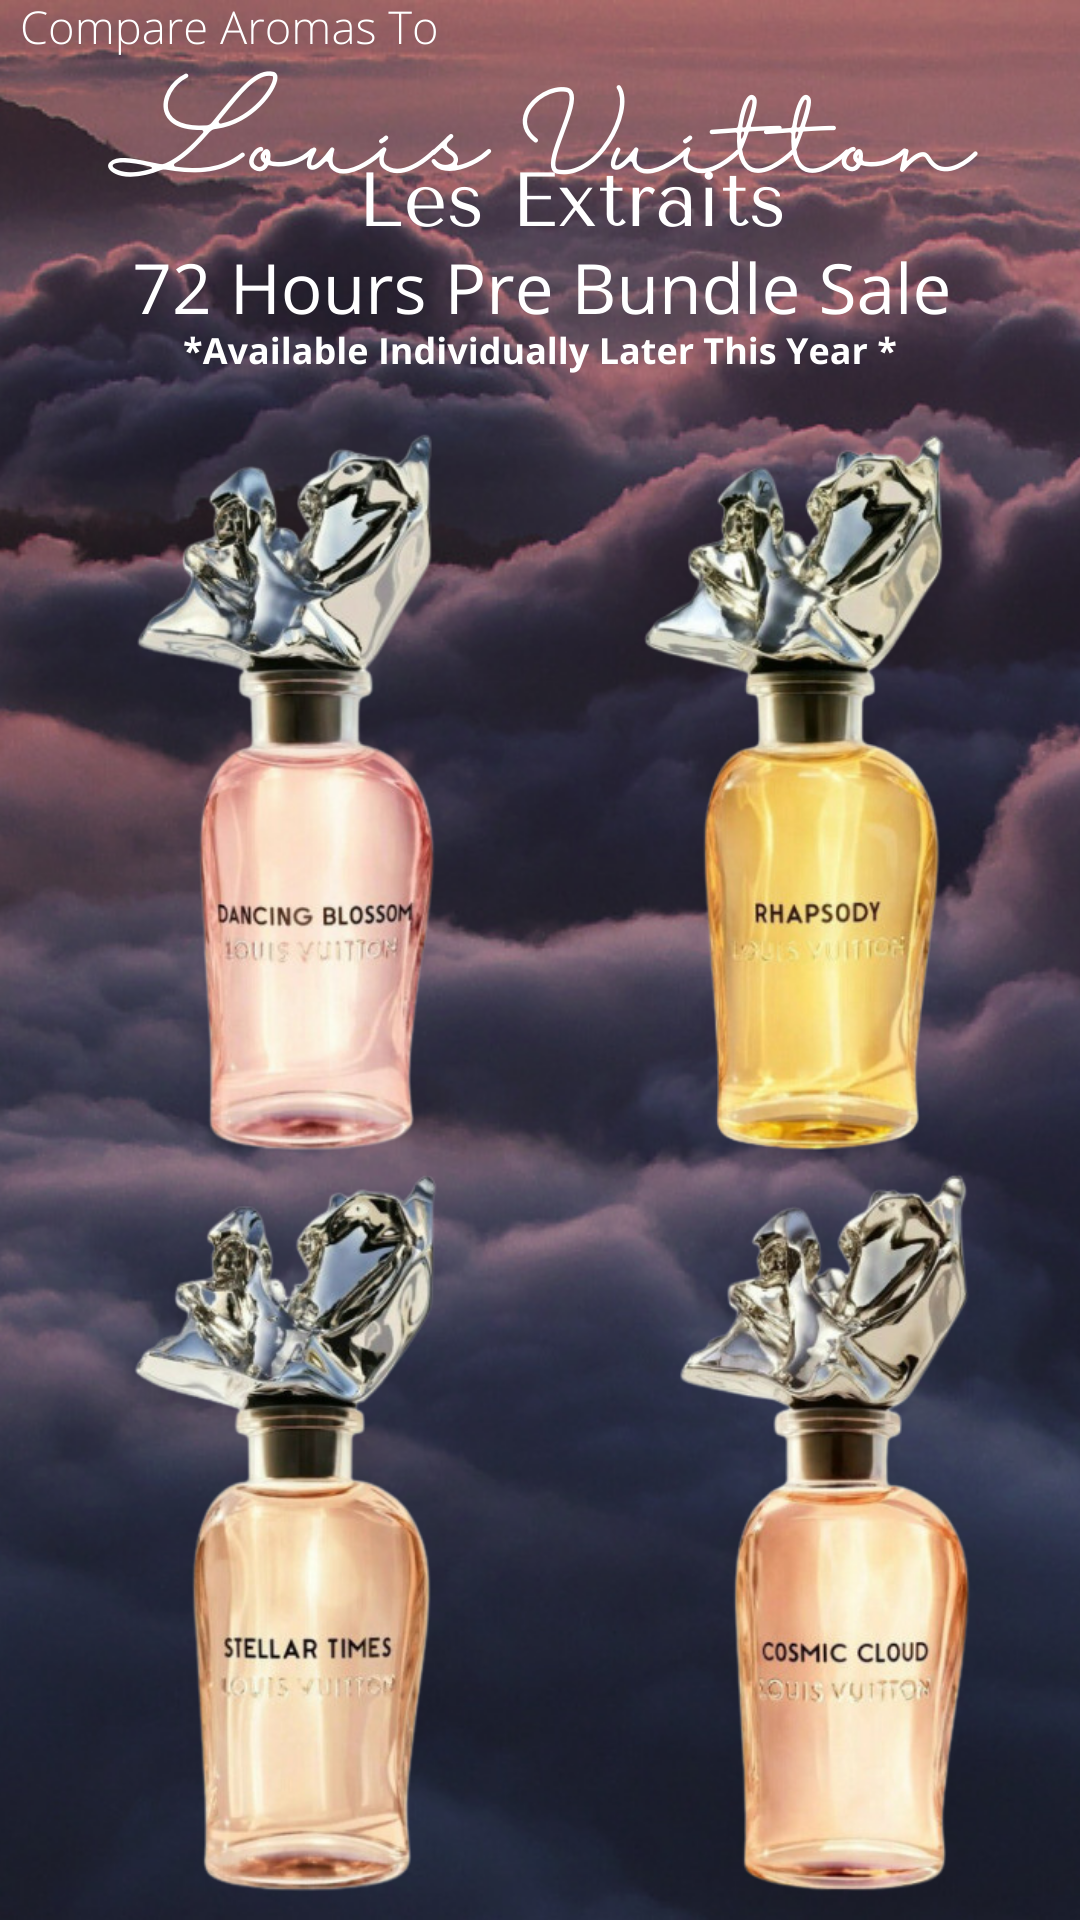 Stellar Times Louis Vuitton perfume - a fragrance for women and